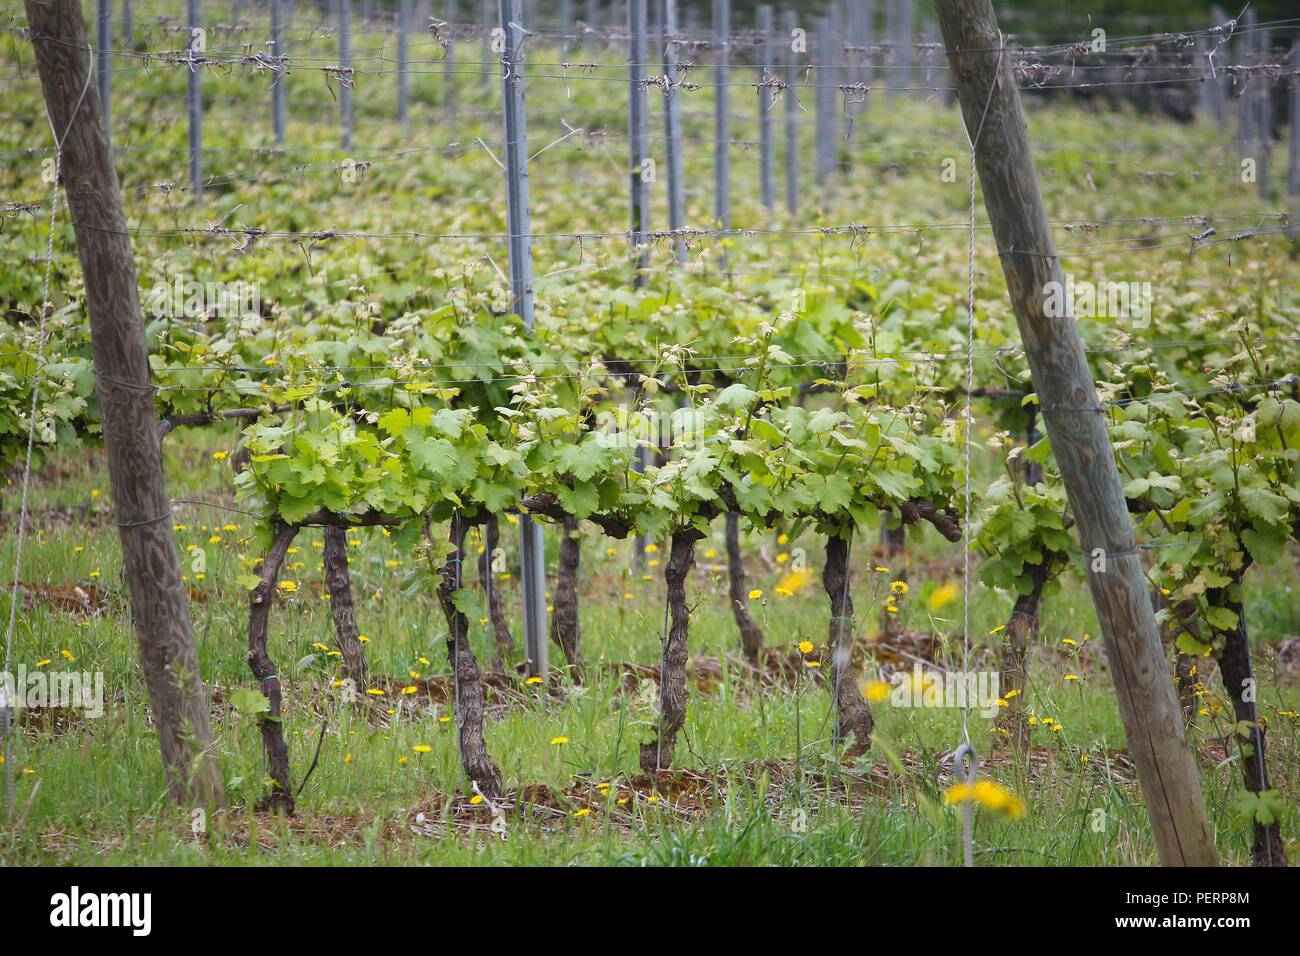 Vineyards in Tuscany - rural Italy. Agricultural area in the province of Siena. Stock Photo